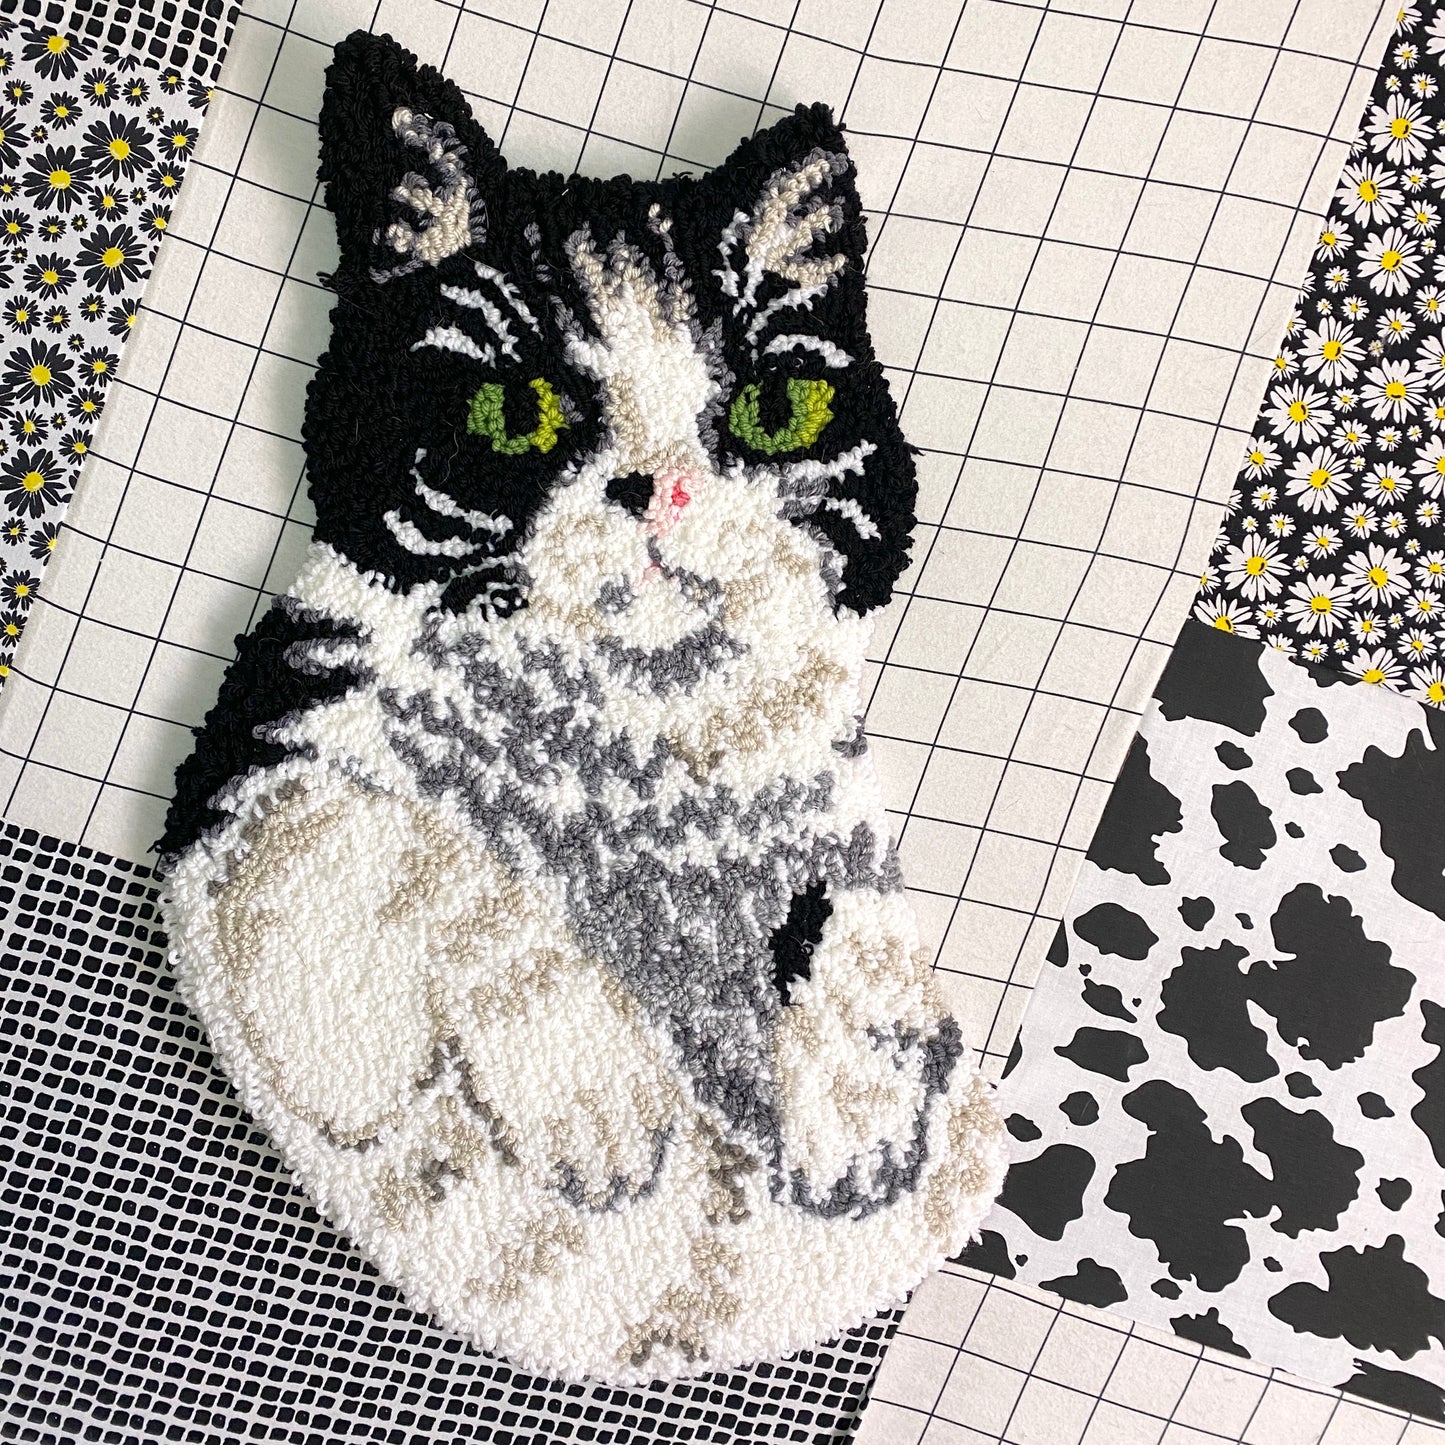 Commissioned Custom Rug Pet Portrait | Turn Your Pet Into A Rug! | Made to Order